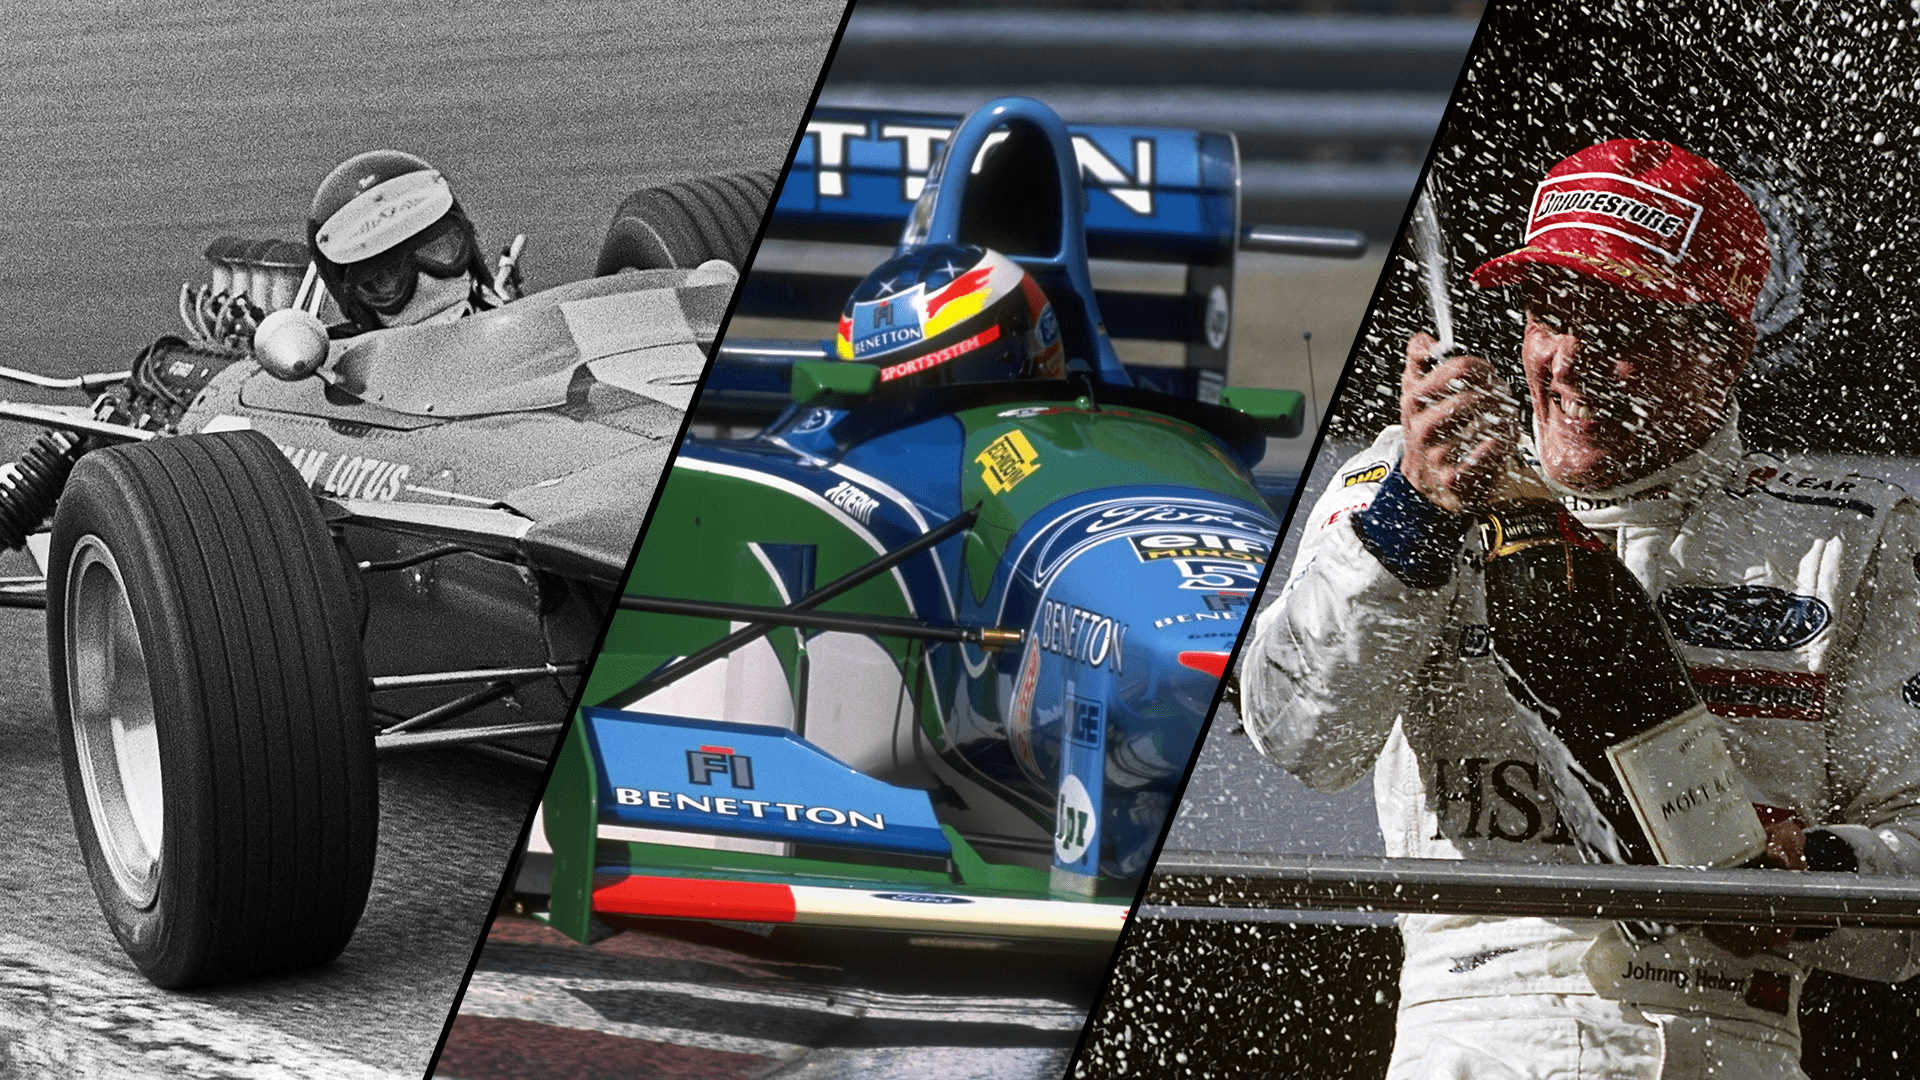 GREATEST HITS Fords best moments in F1 as they get set for a comeback with Red Bull Formula 1®